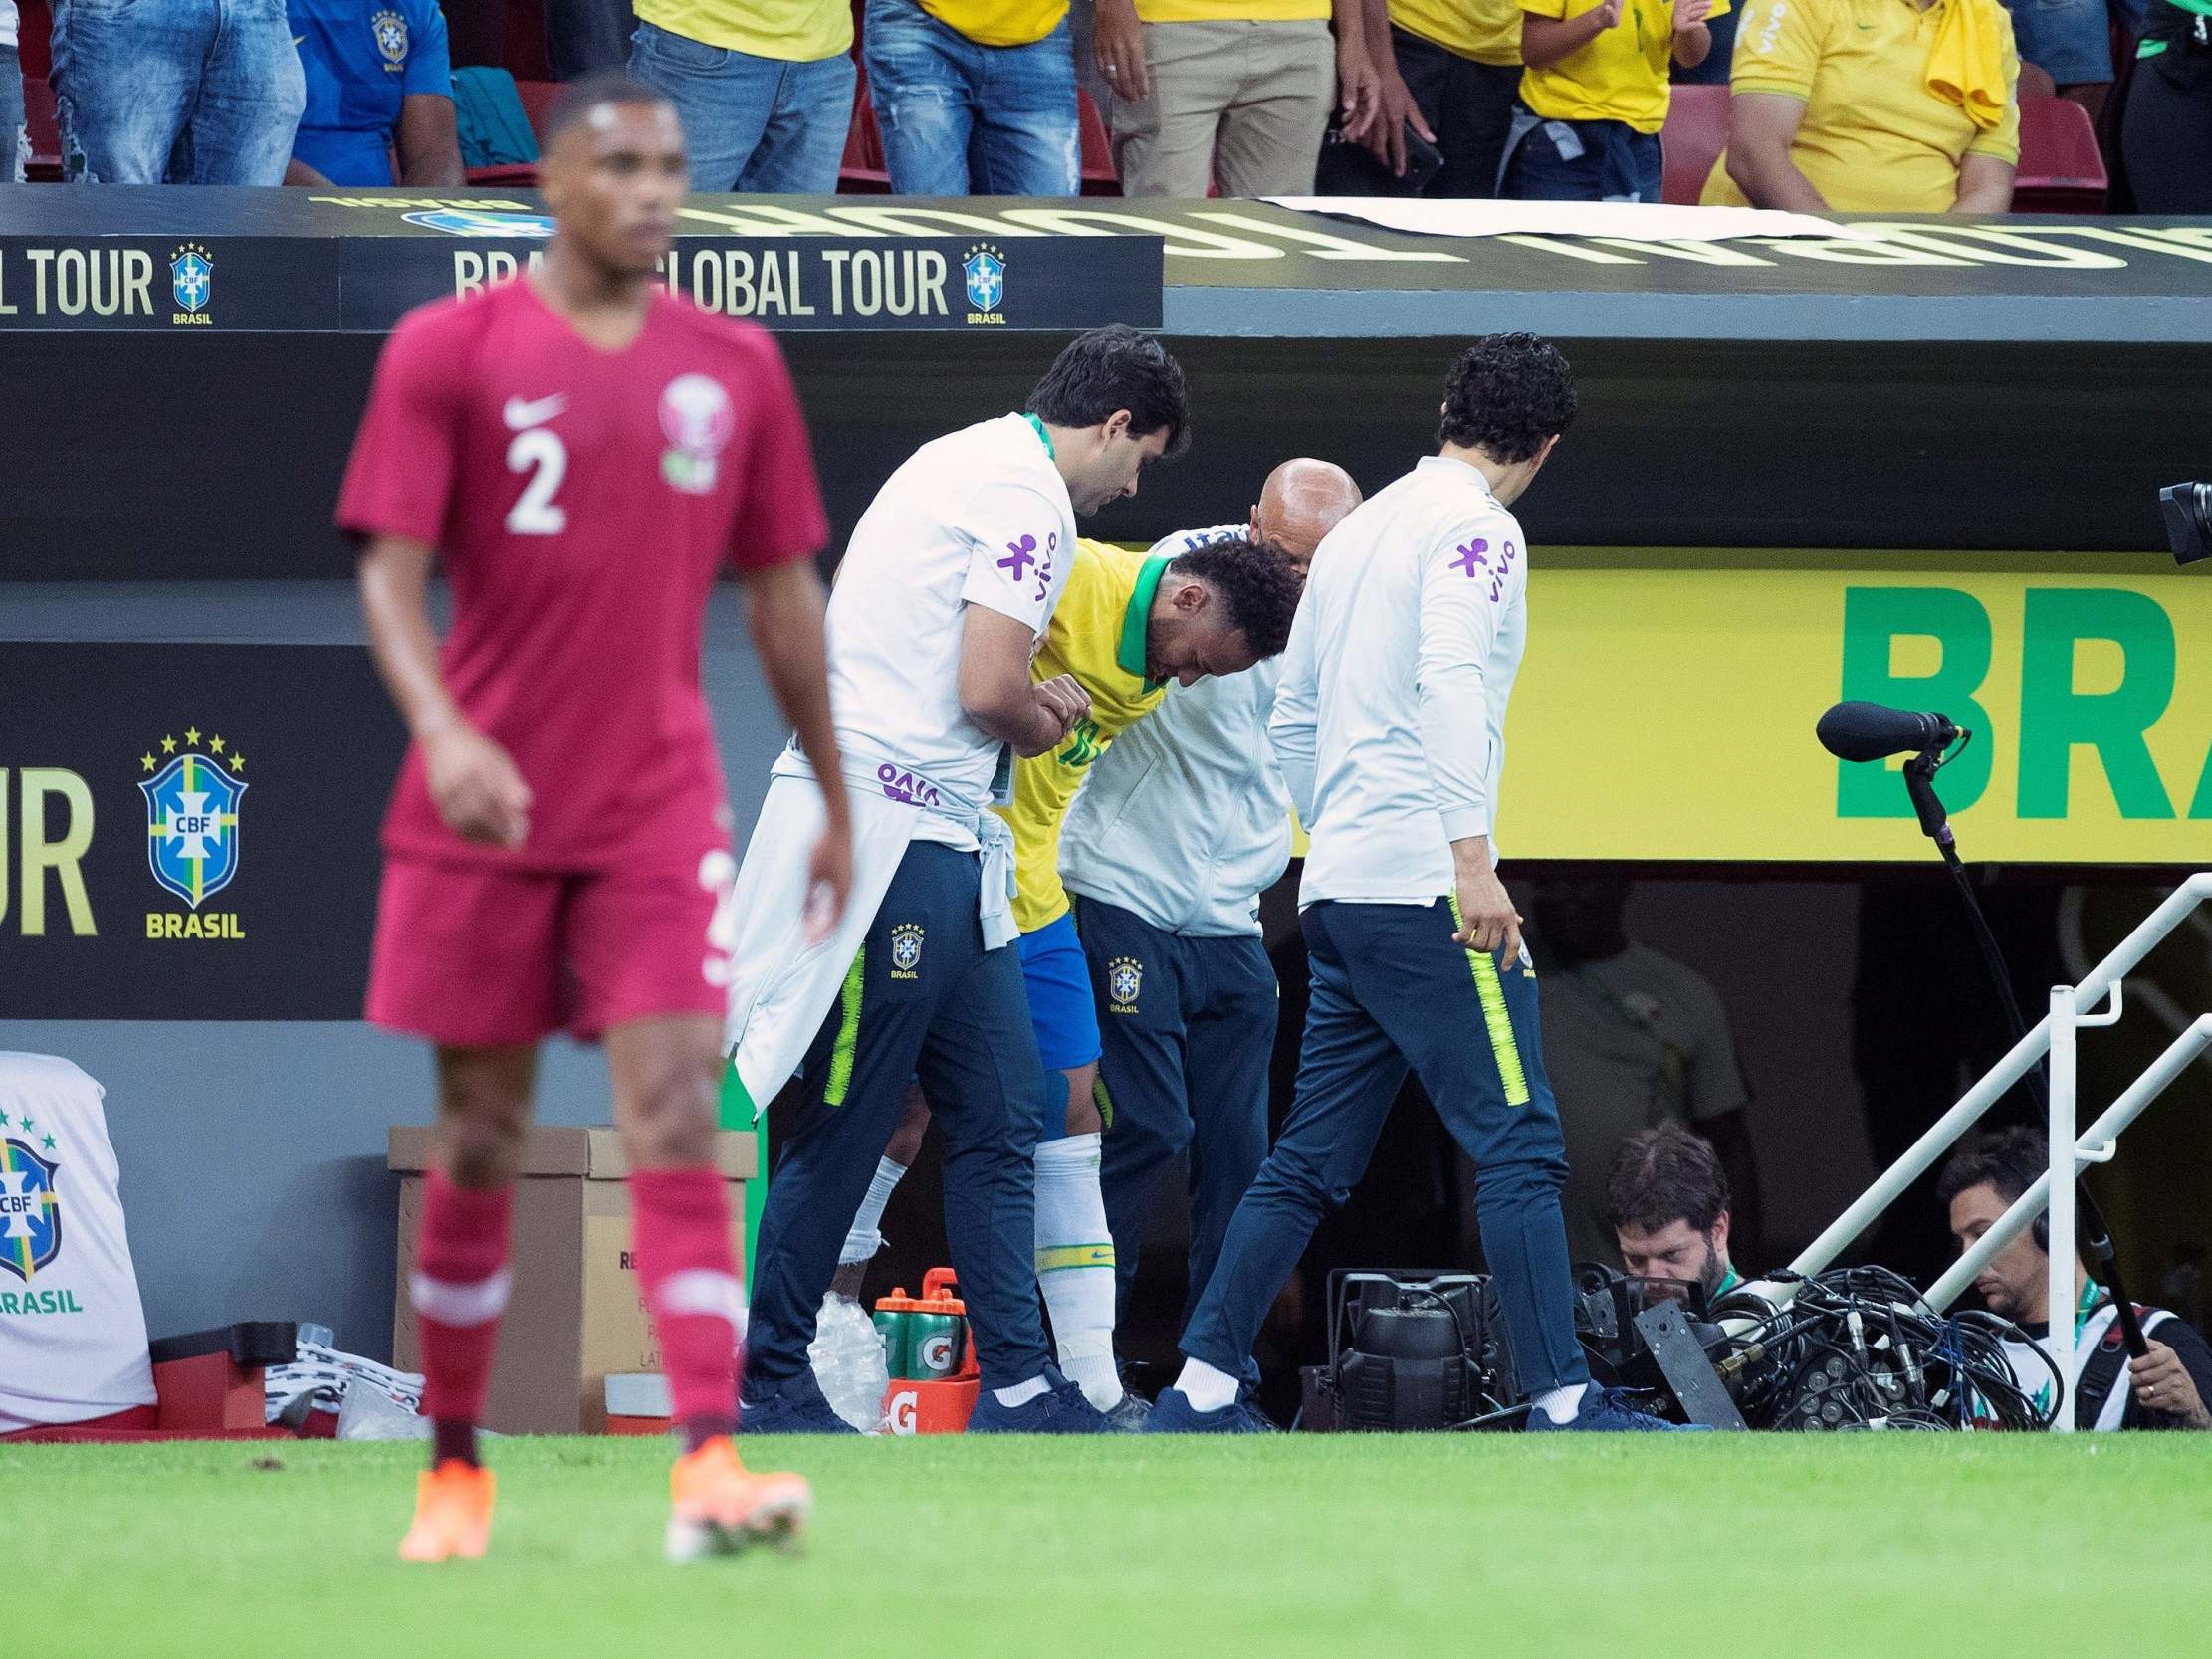 Neymar ruptures ligaments in his ankle against Qatar